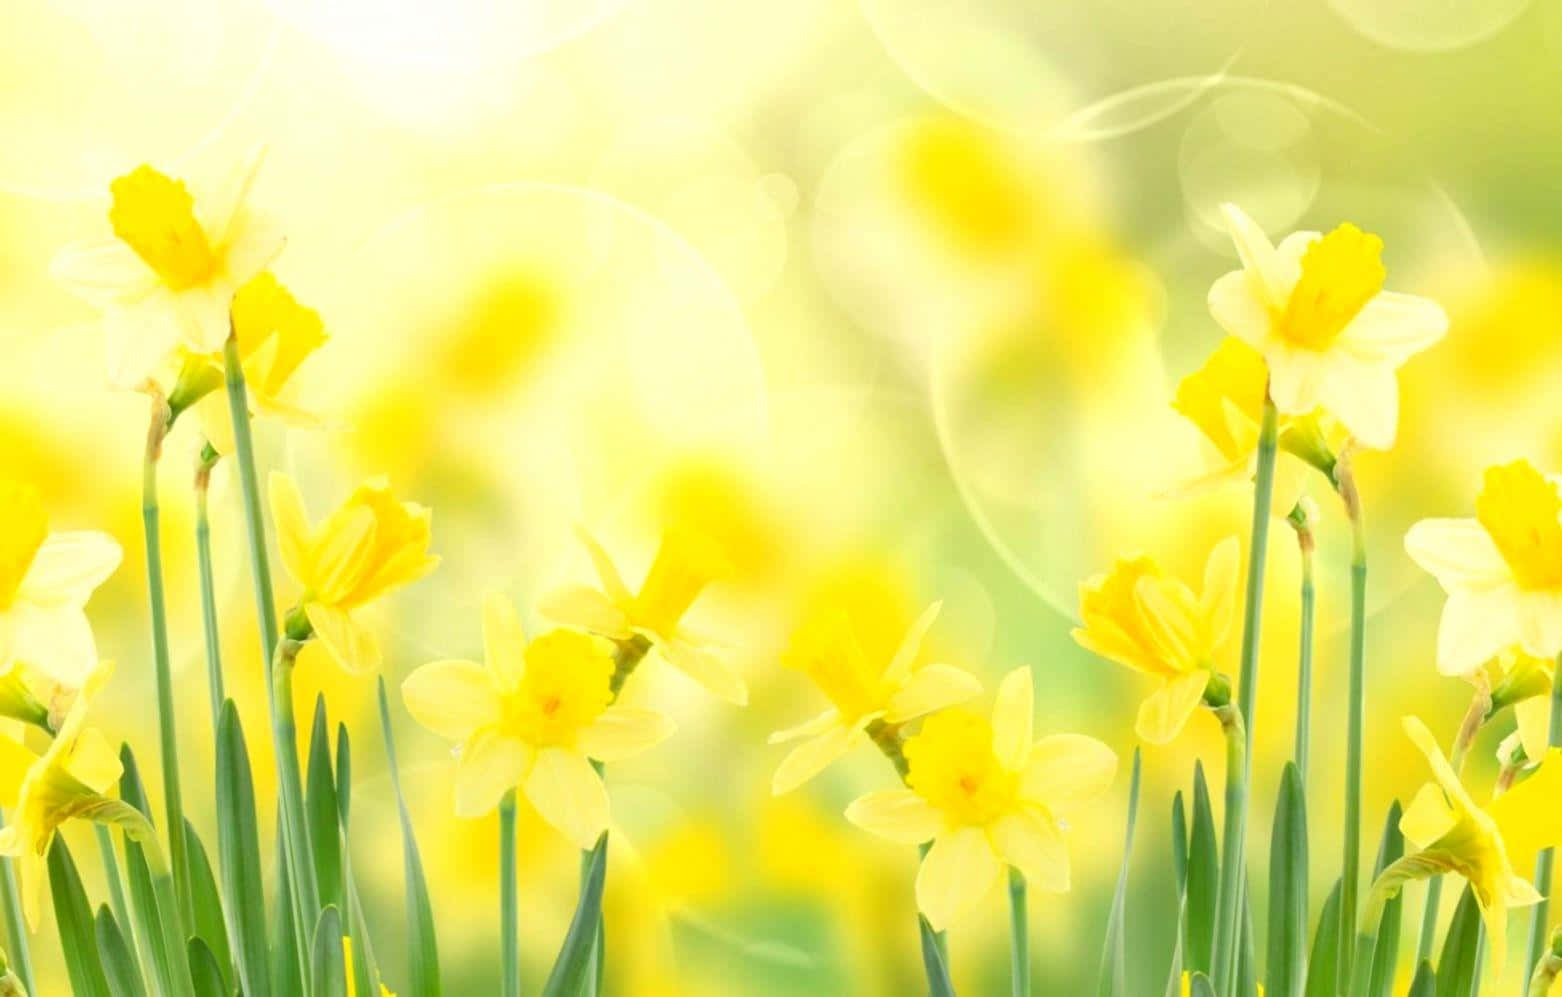 Vibrant Yellow Daffodils Blooming in a Lush Garden Wallpaper